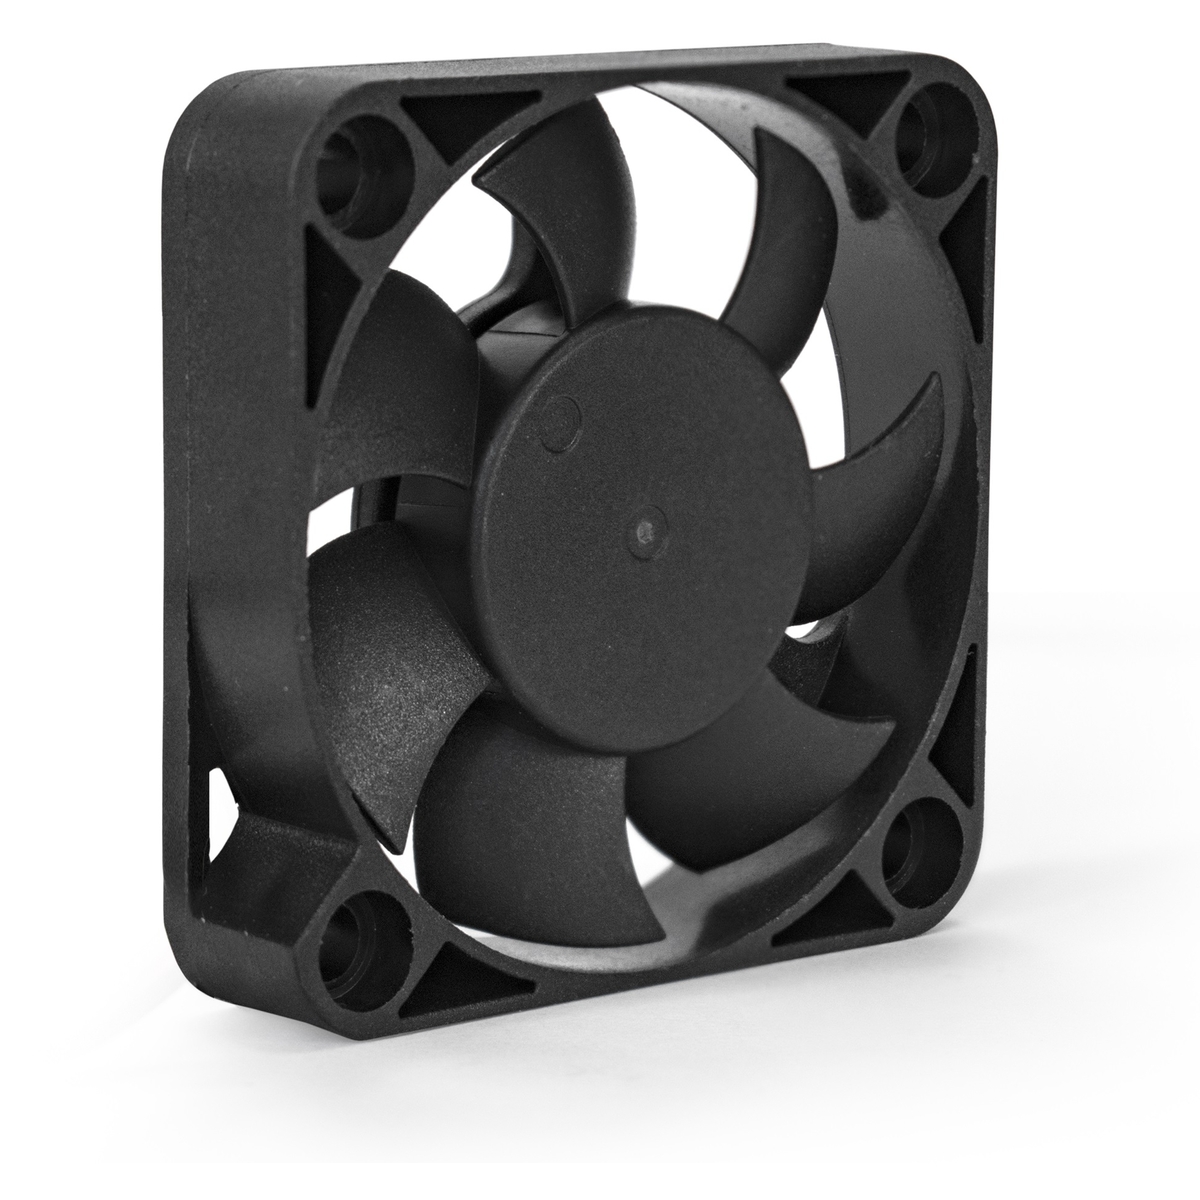 Fan ExeGate ExtraPower EP05010S3P